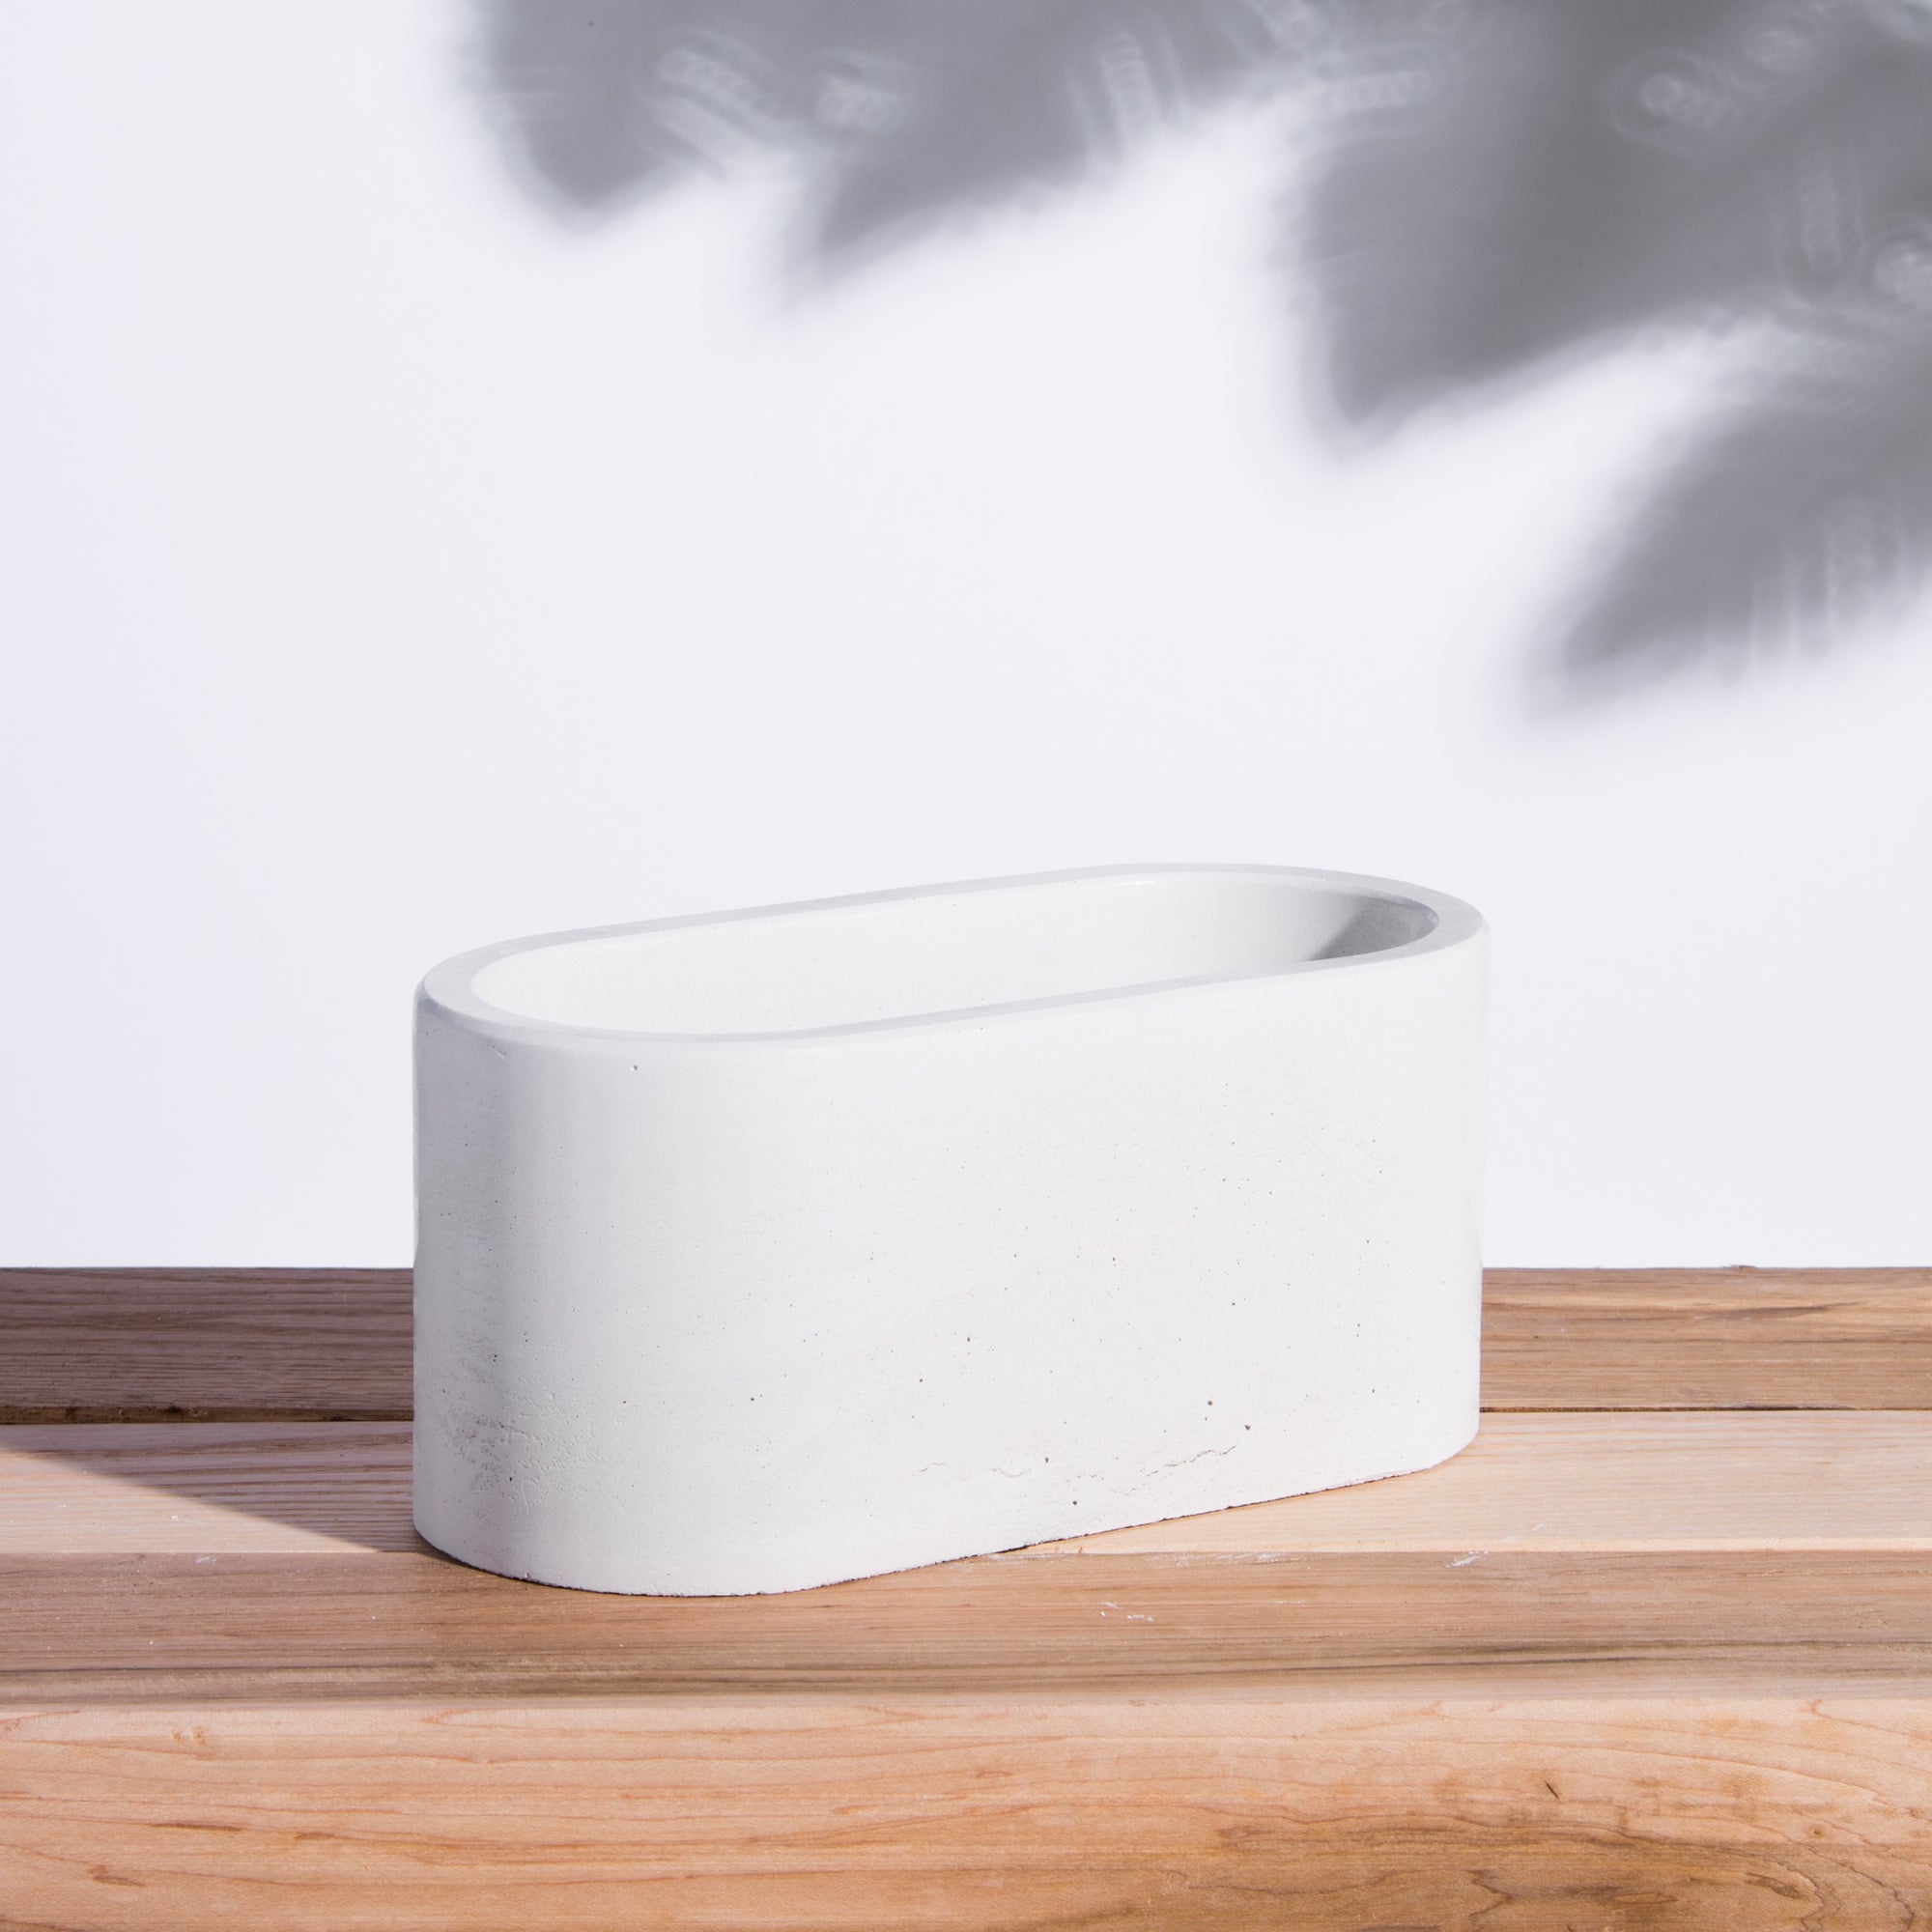 Oval Concrete Planter. Handcrafted in Toronto, Canada.